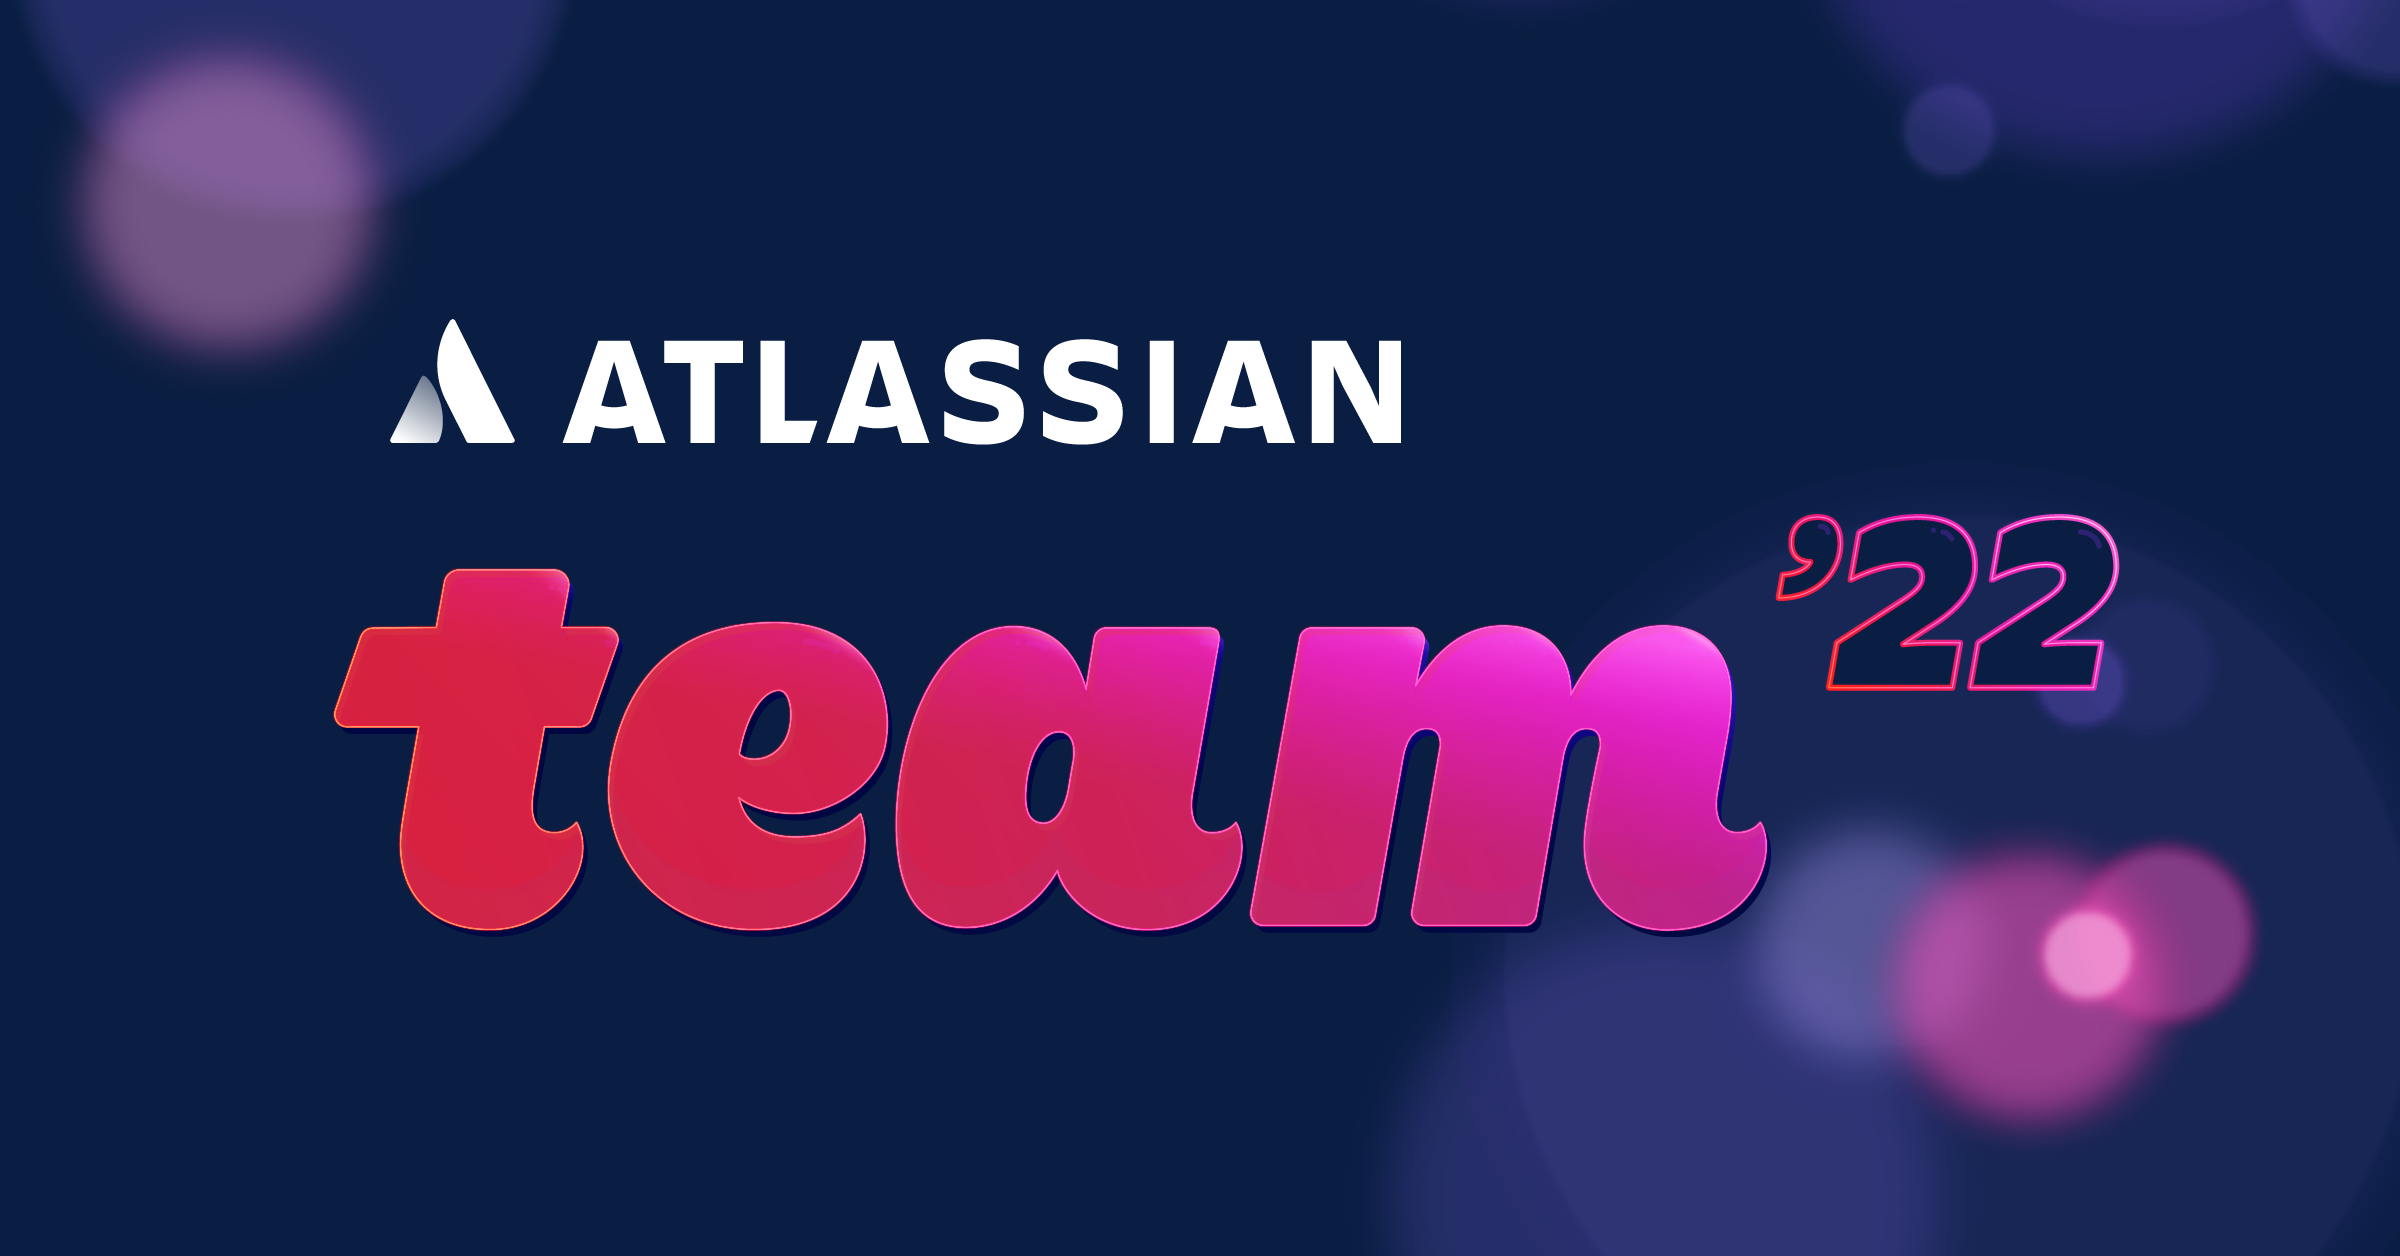 Automation Consultants is attending Atlassian Team 22